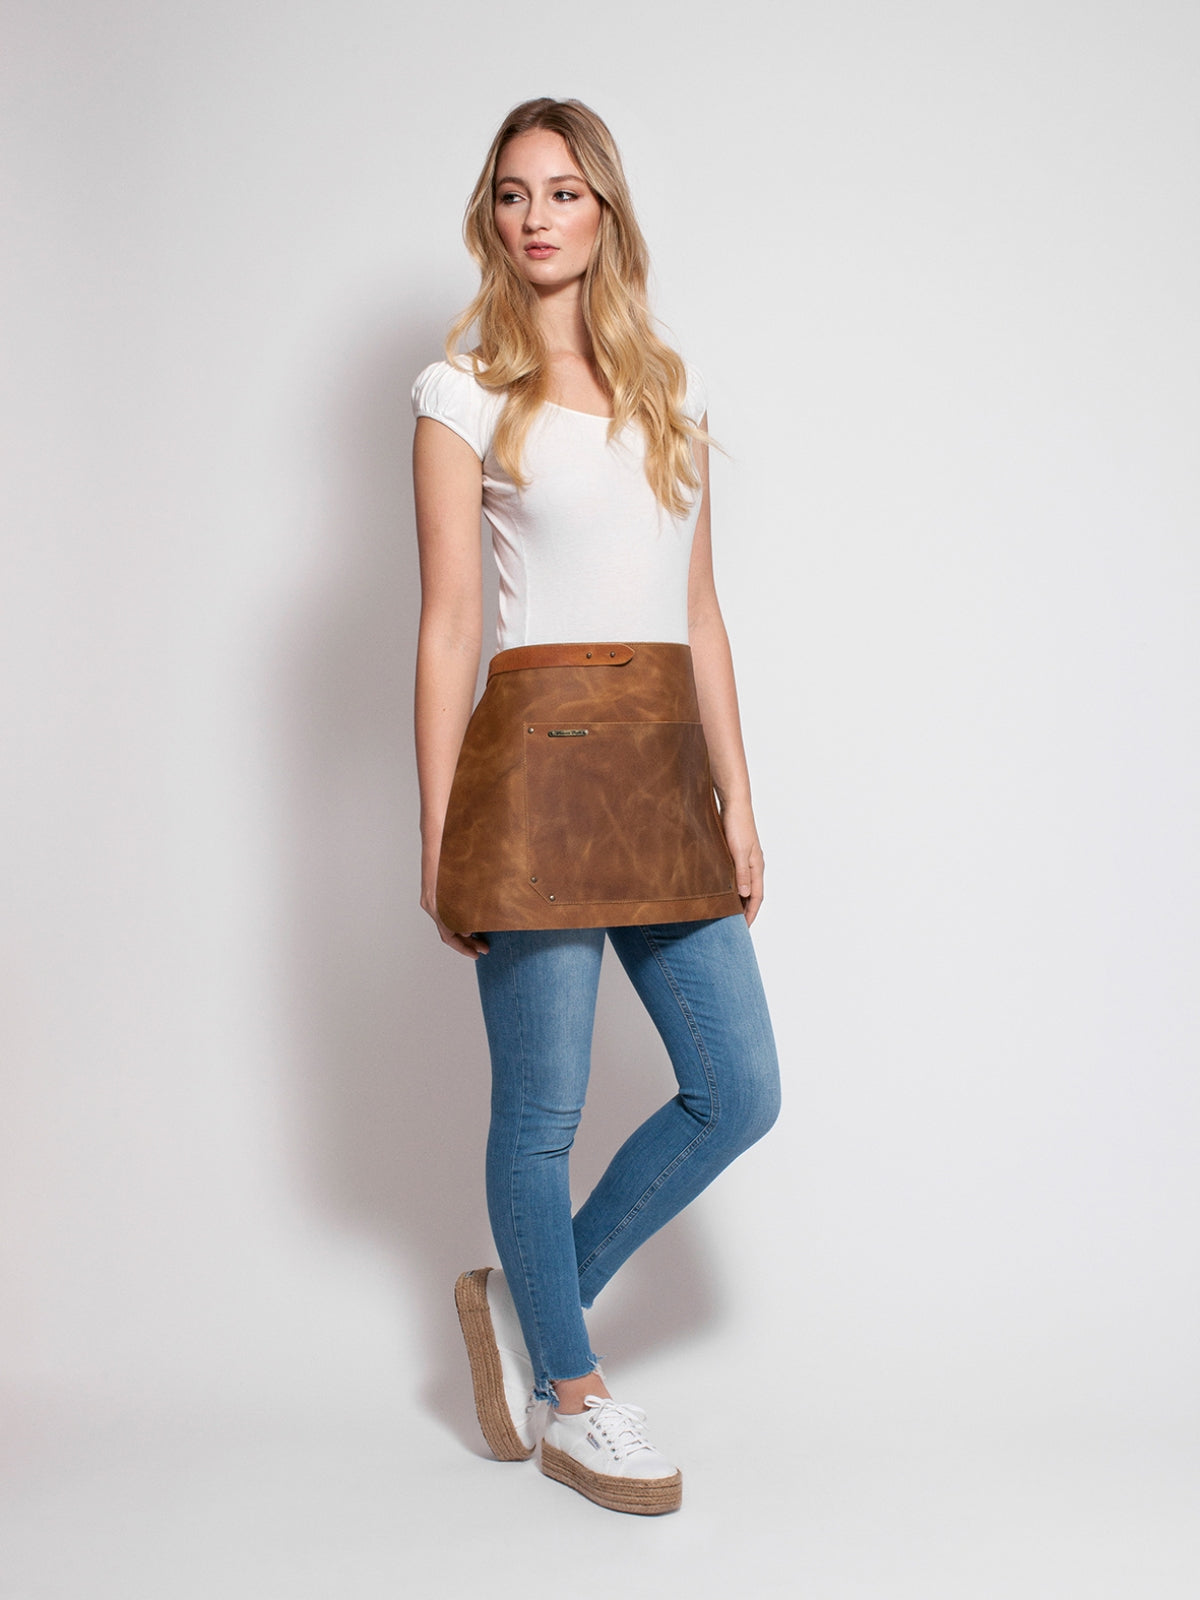 Leather Waist Apron Rustic Whiskey by STW -  ChefsCotton